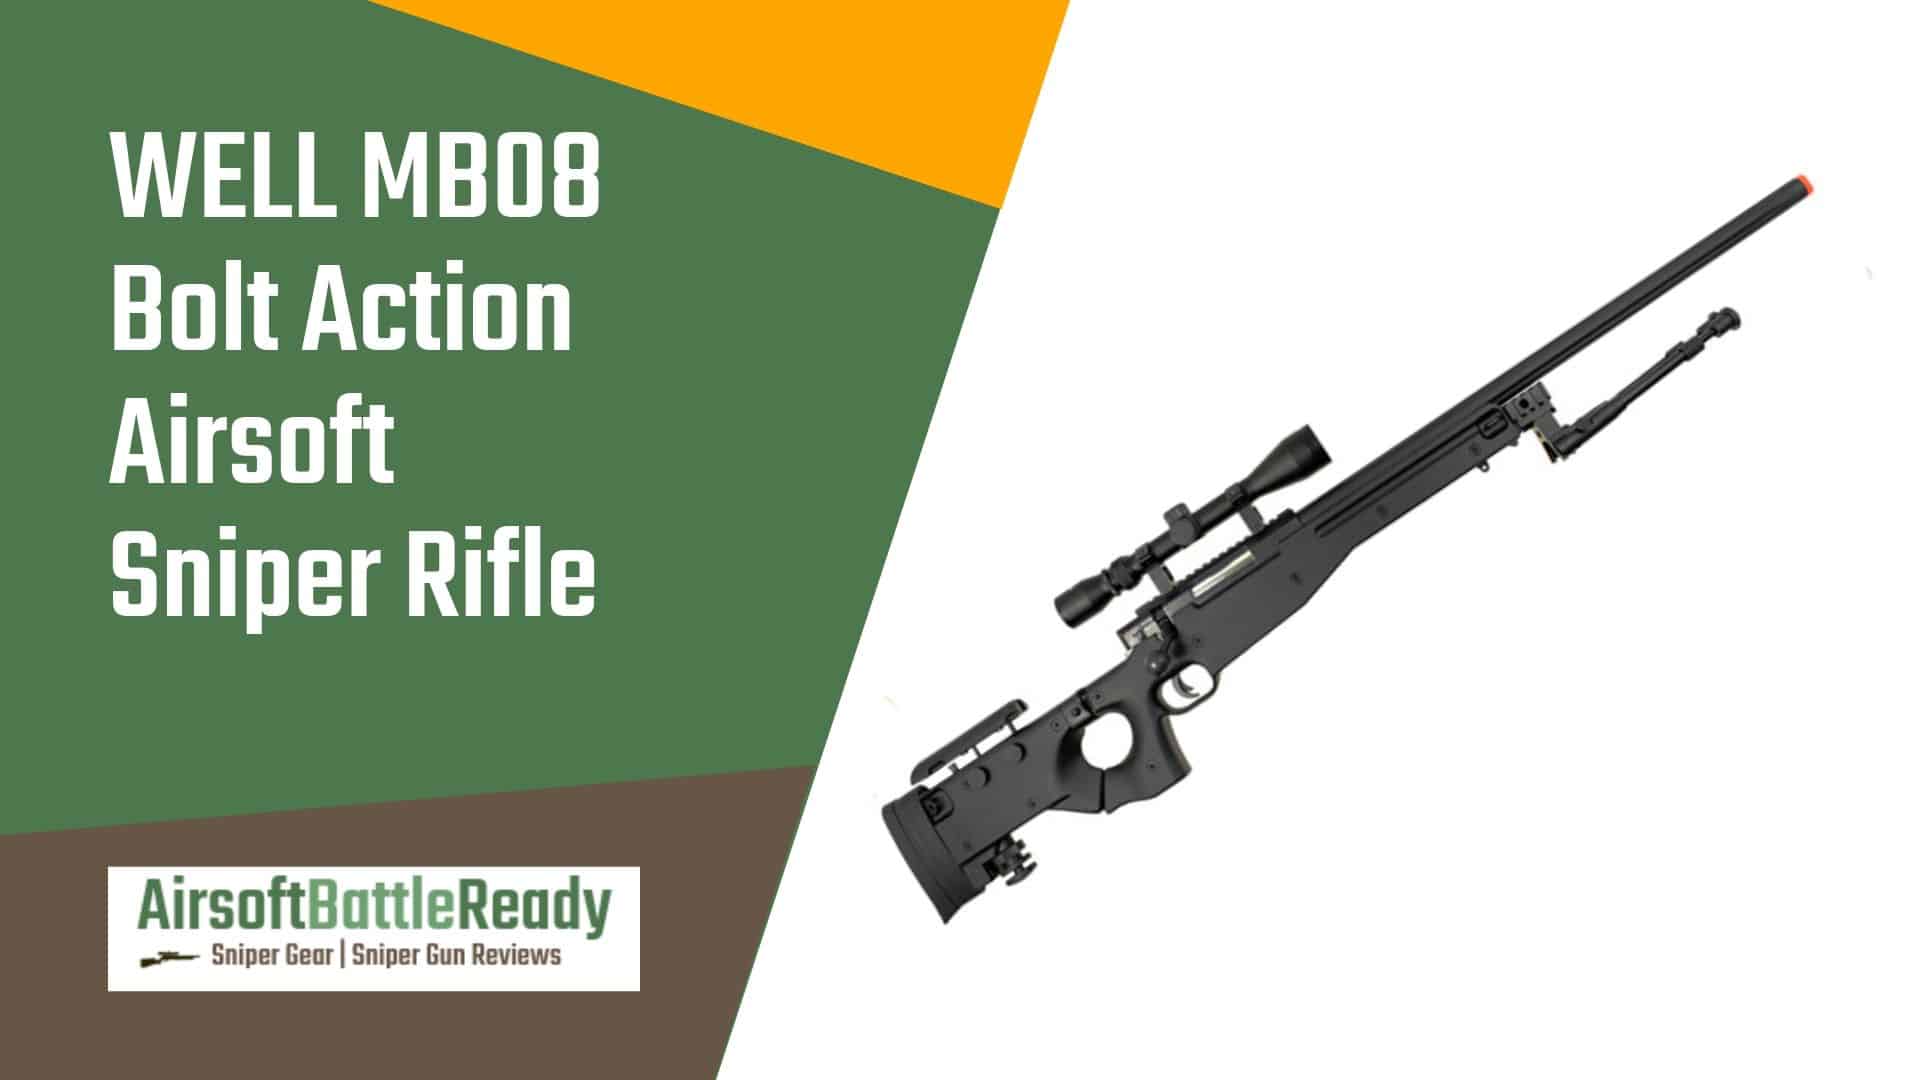 WELL MB08 Bolt Action Airsoft Sniper Rifle Review - Airsoft Battle Ready